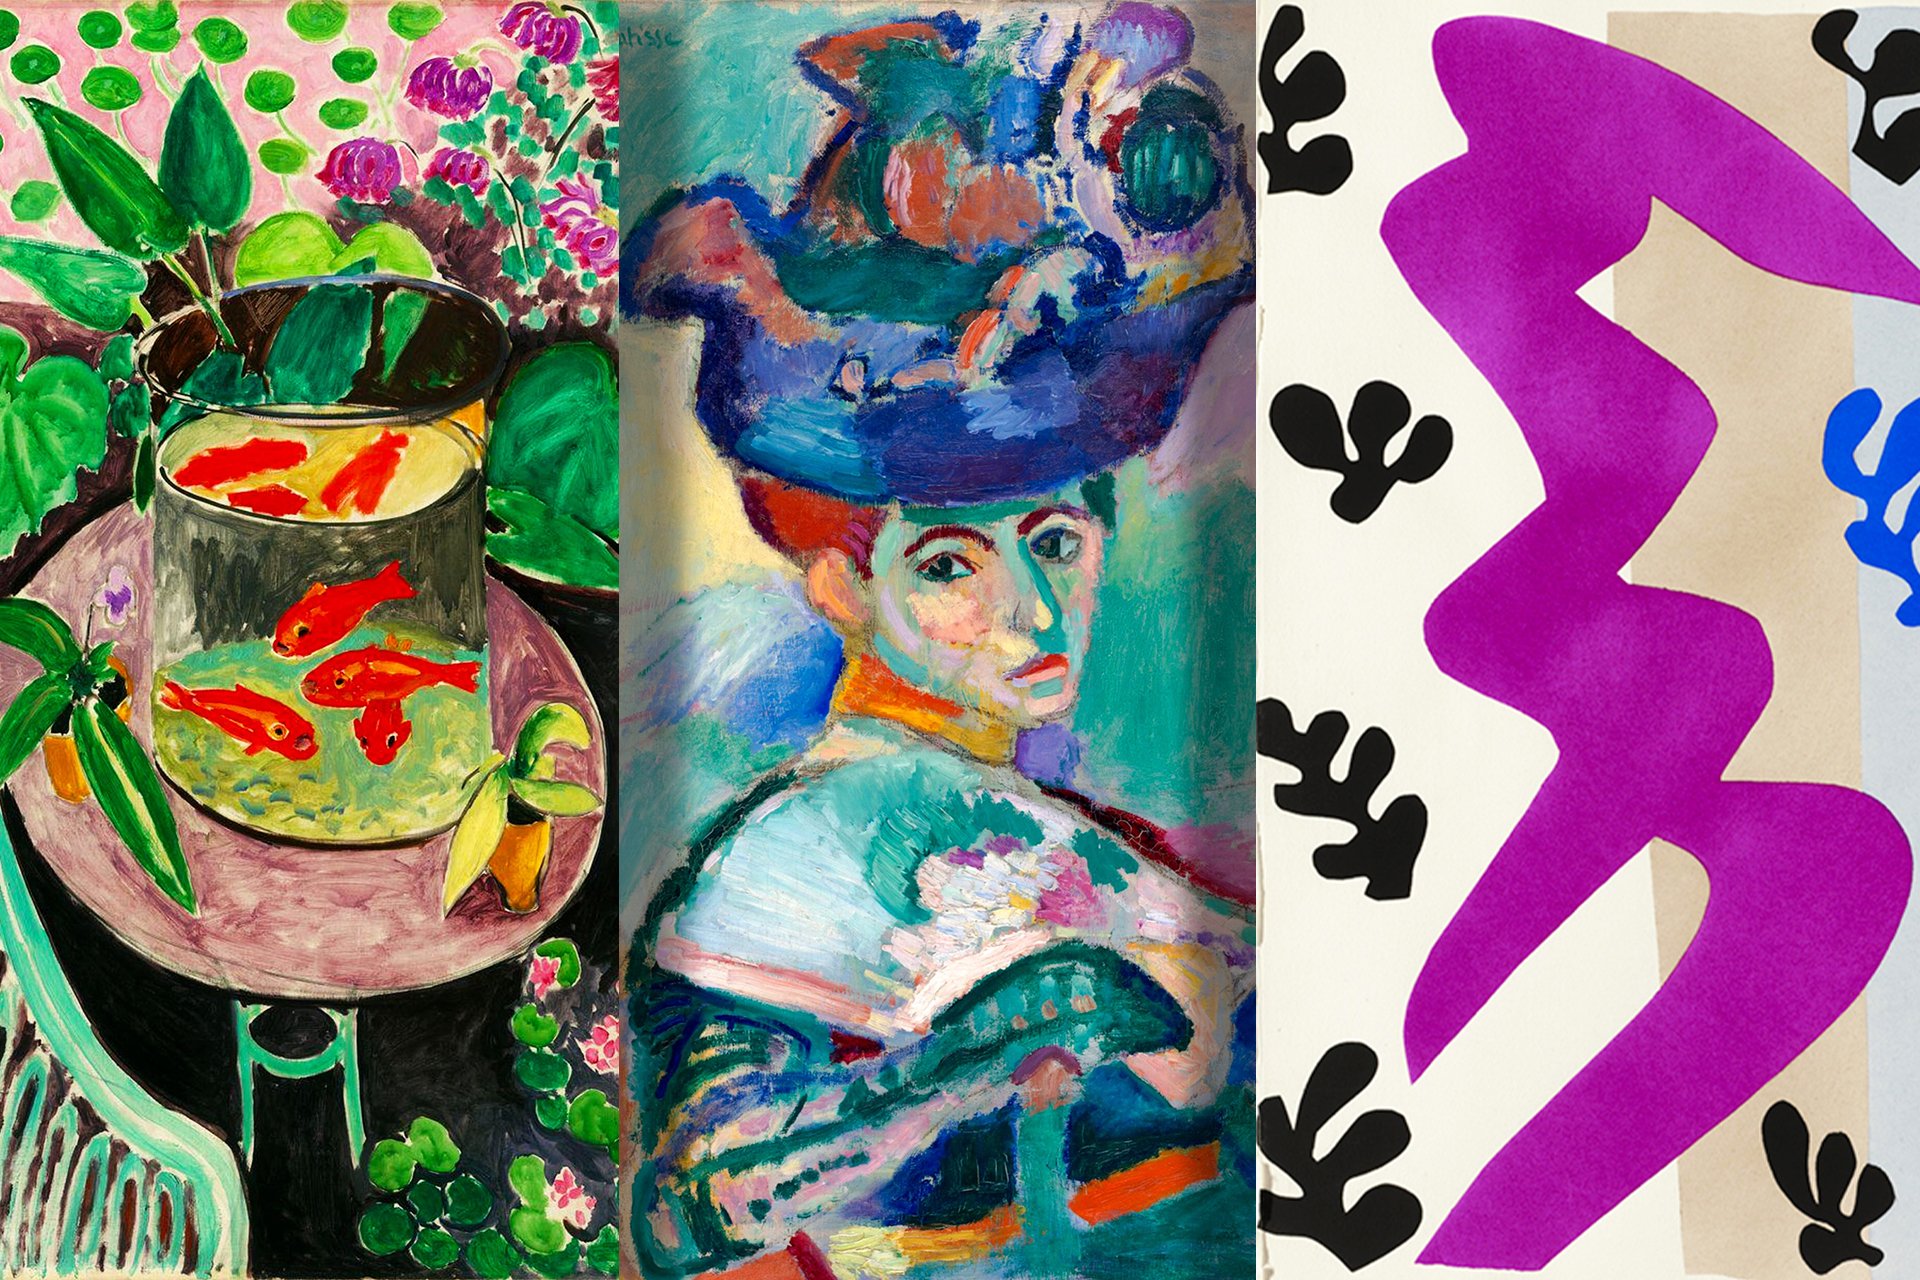 A collage of three Henri Matisse paintings, showcasing his vivid use of color and form: on the left, the tranquil "Goldfish" with vibrant orange fish in a bowl, center, the iconic "Woman with a Hat" featuring bold, expressive hues, and on the right, a purple, abstract cut-out, all reflecting Matisse's unique and revolutionary art style.